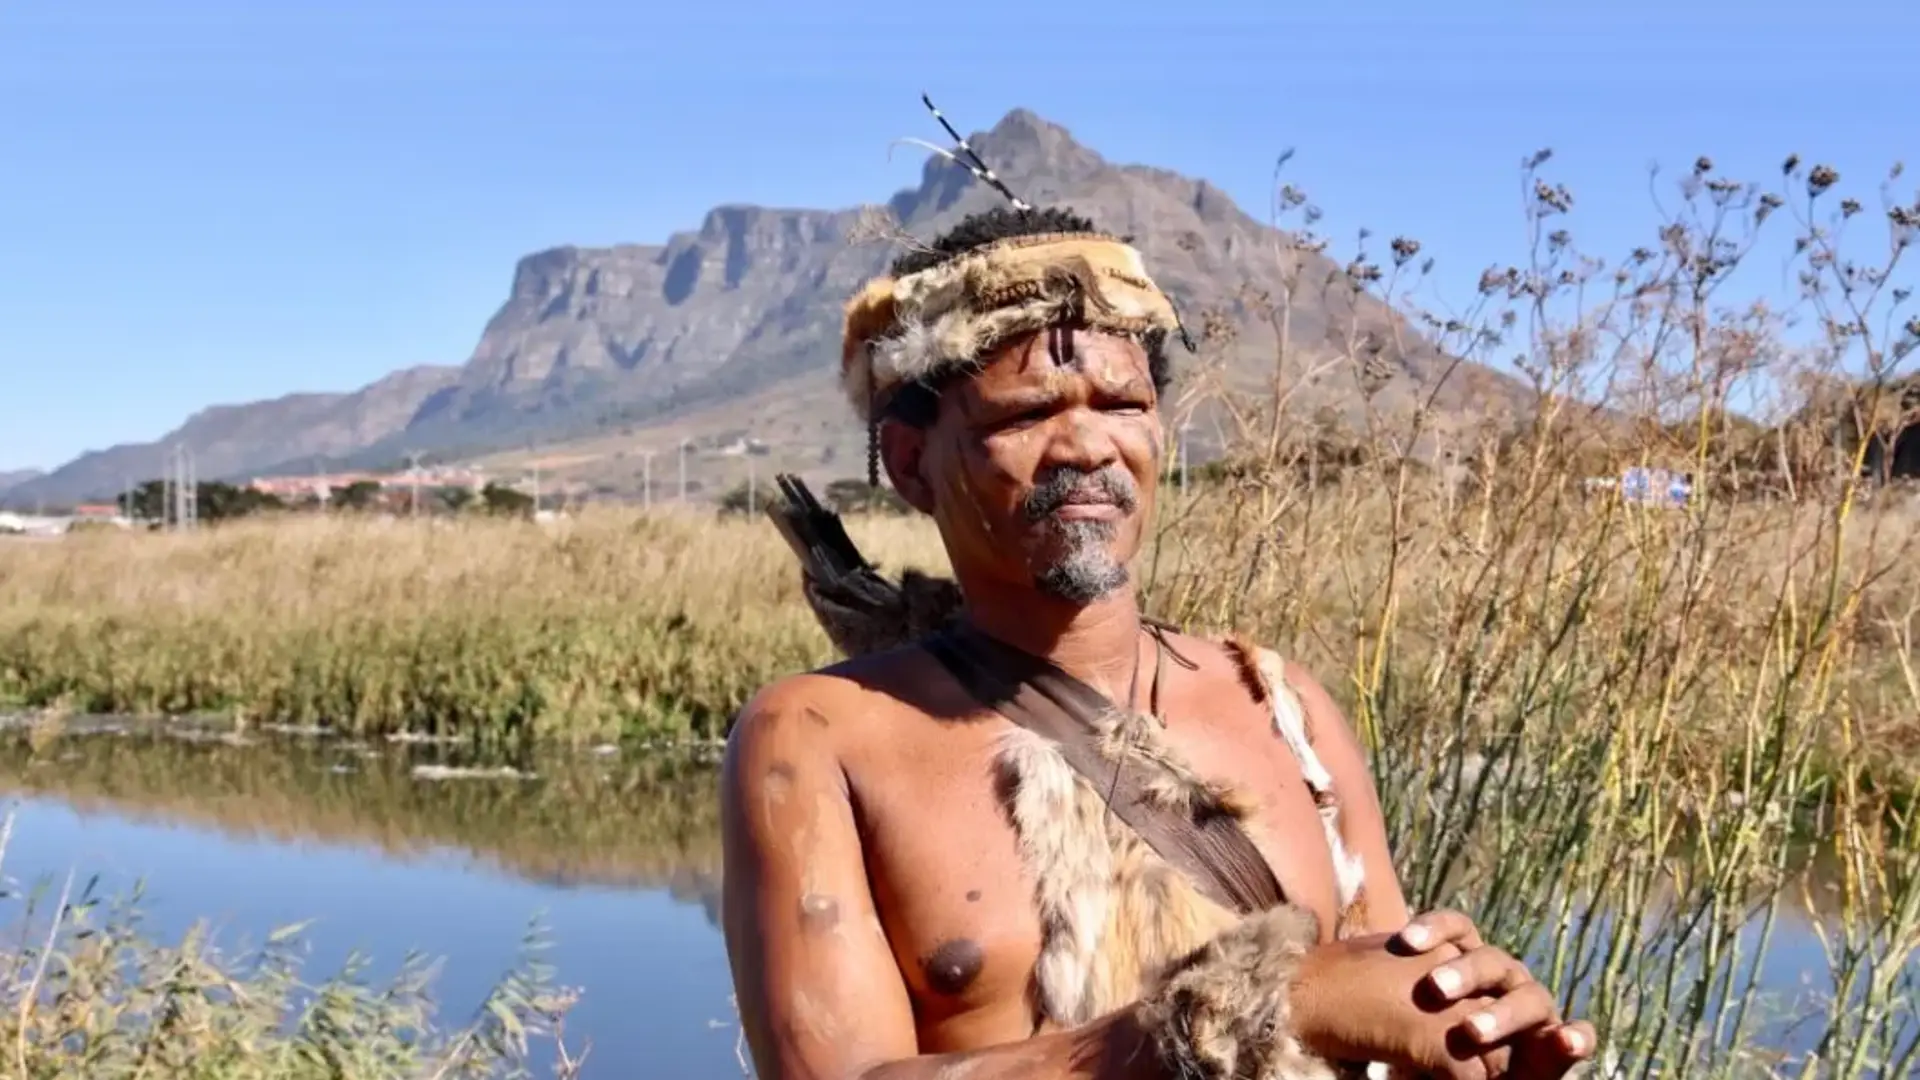 A Khoisan man wearing traditional attire in front of scenic landscape